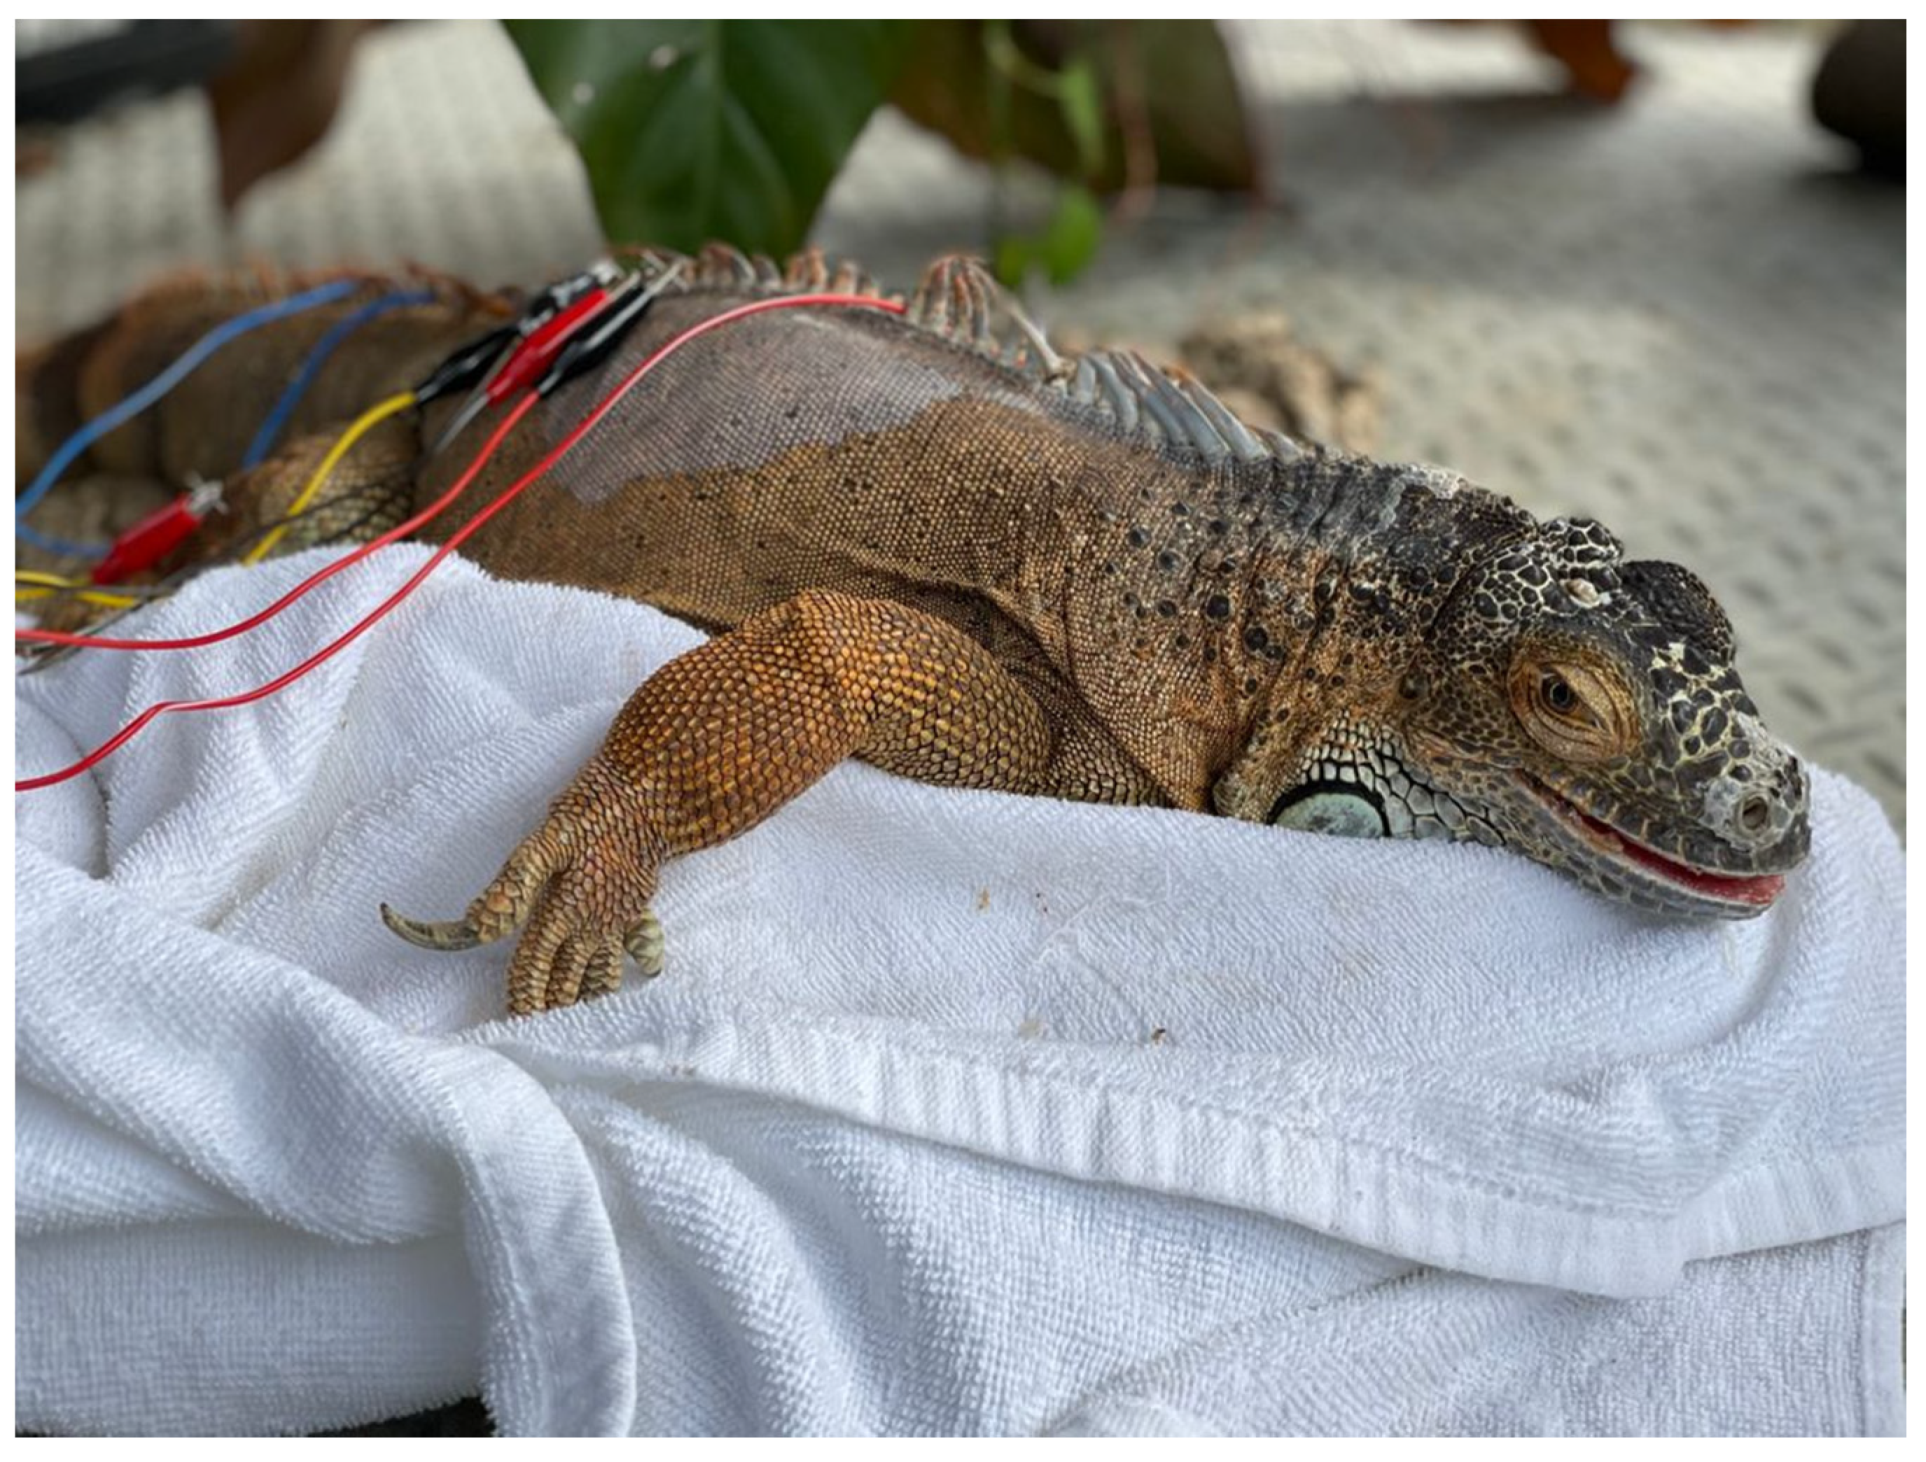 Veterinary Sciences | Free Full-Text | Acupuncture and Traditional Chinese Veterinary  Medicine in Zoological and Exotic Animal Medicine: A Review and  Introduction of Methods